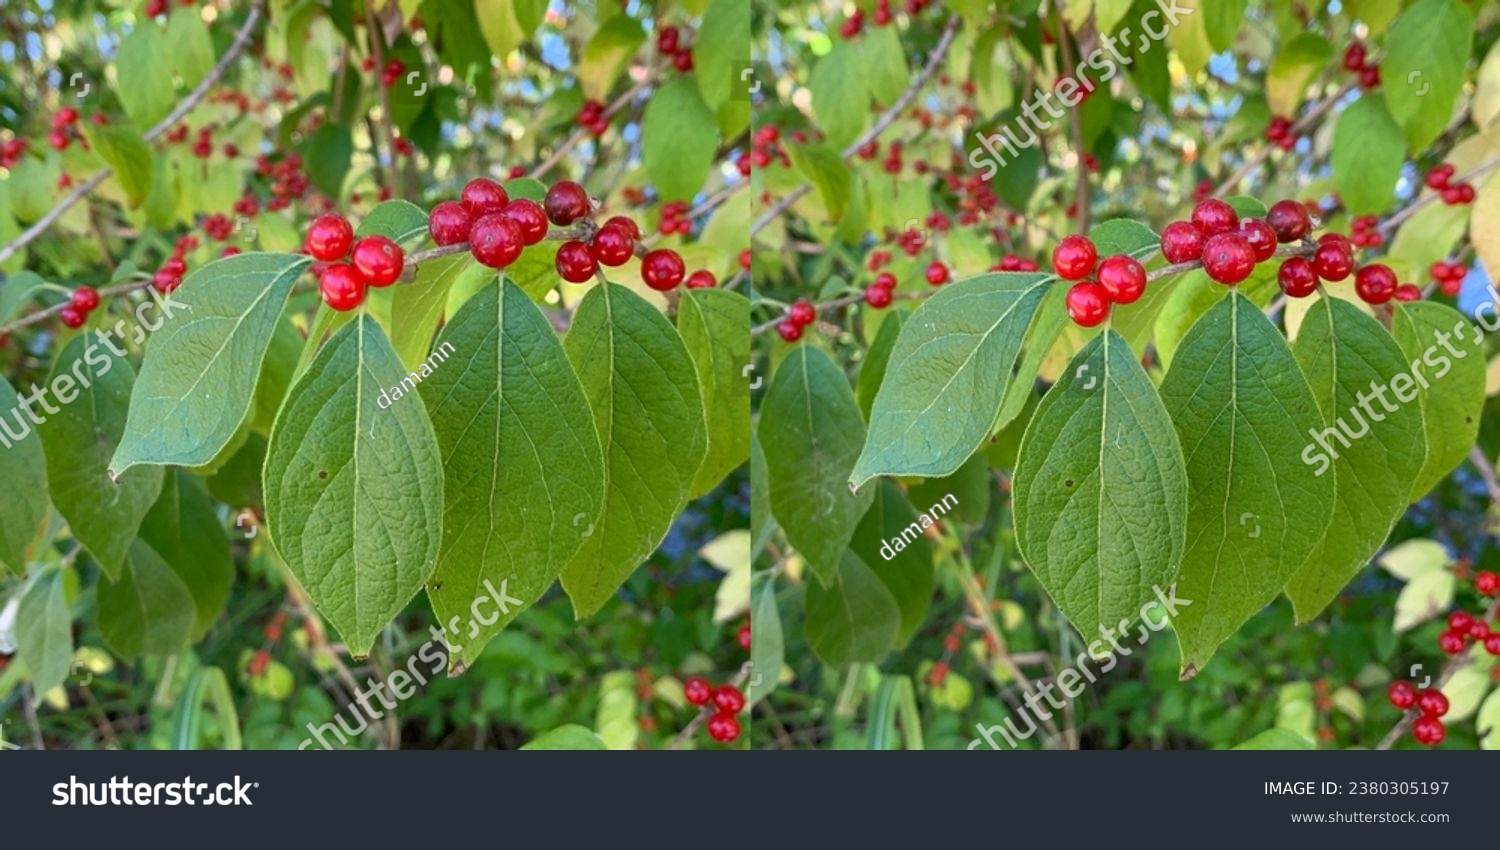 3D Stereoscopic pair of images of Bush Honeysuckle (Lonicera maackii) with red berries in the fall season arranged for cross eyed viewing. Exchange left and right images for parallel viewing. #2380305197